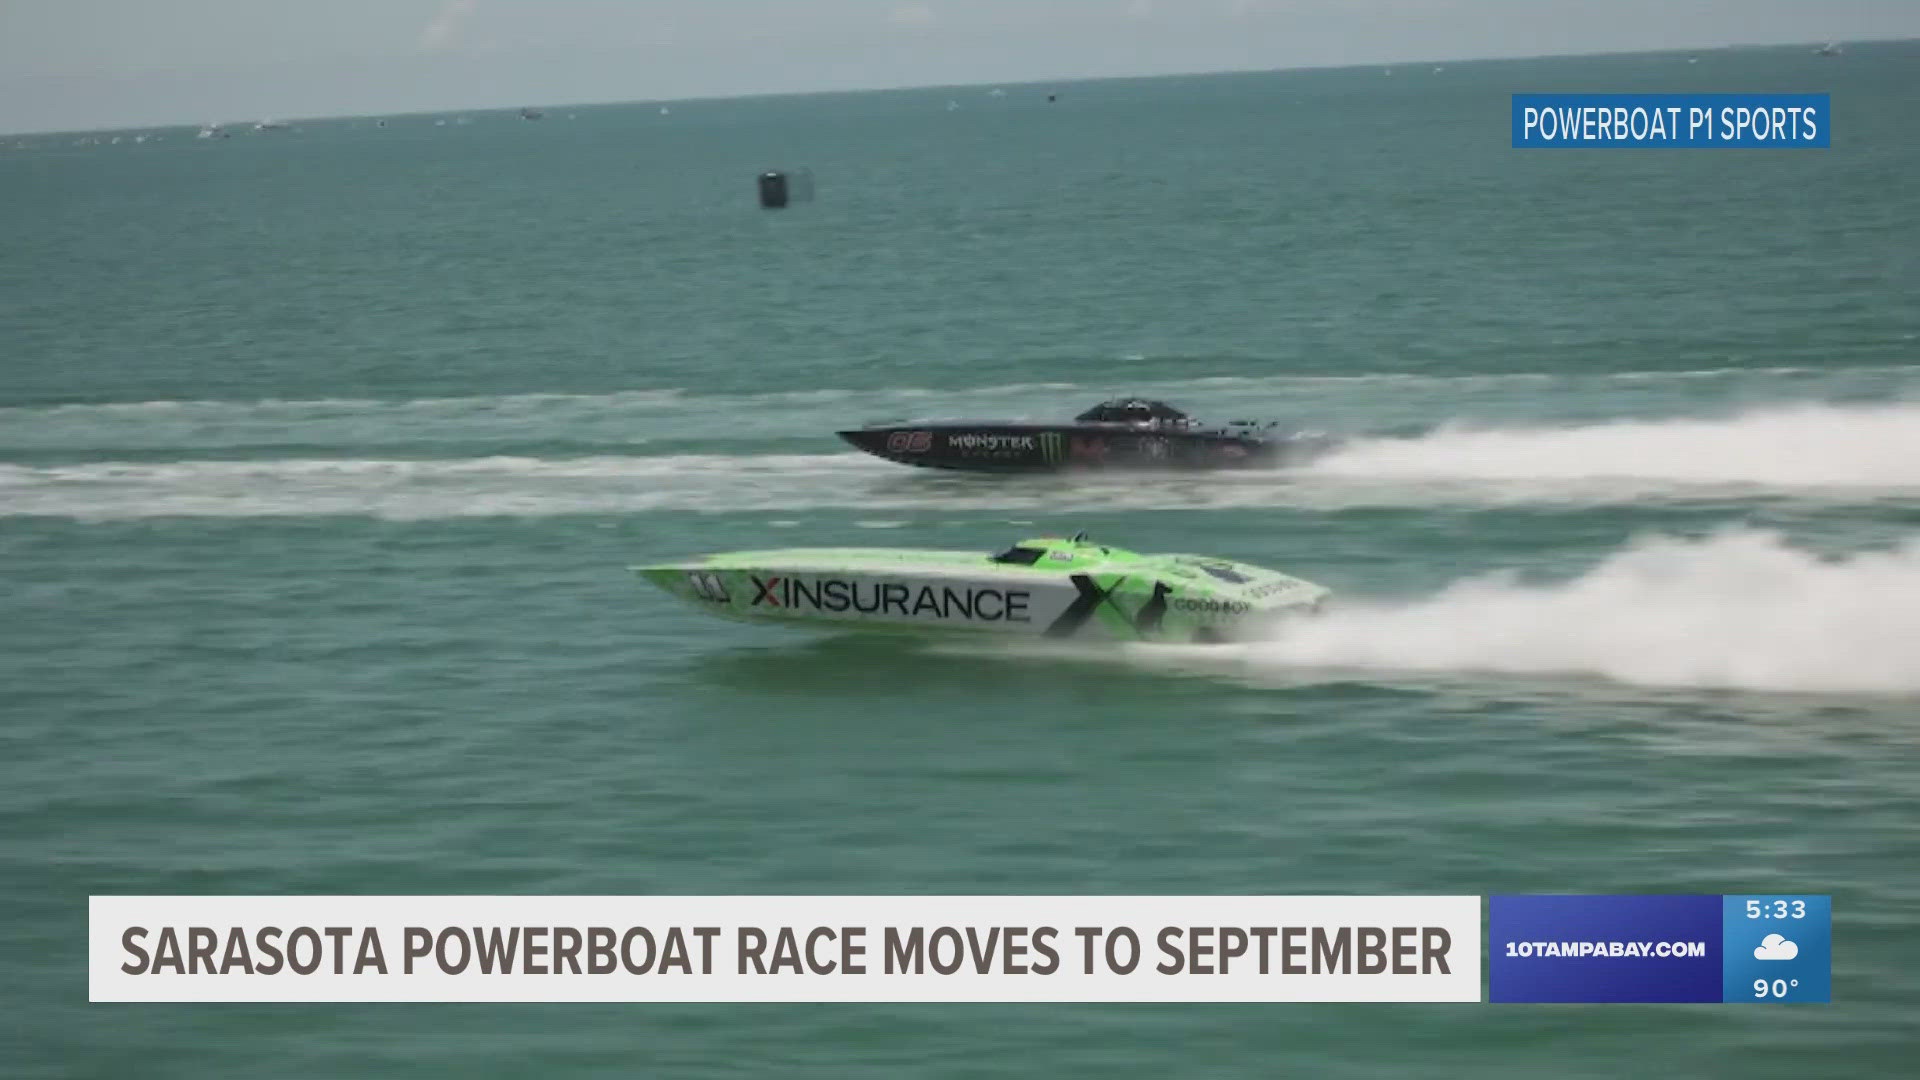 2023's Powerboat Grand Prix generated an estimated $5 million in economic impact for Sarasota.